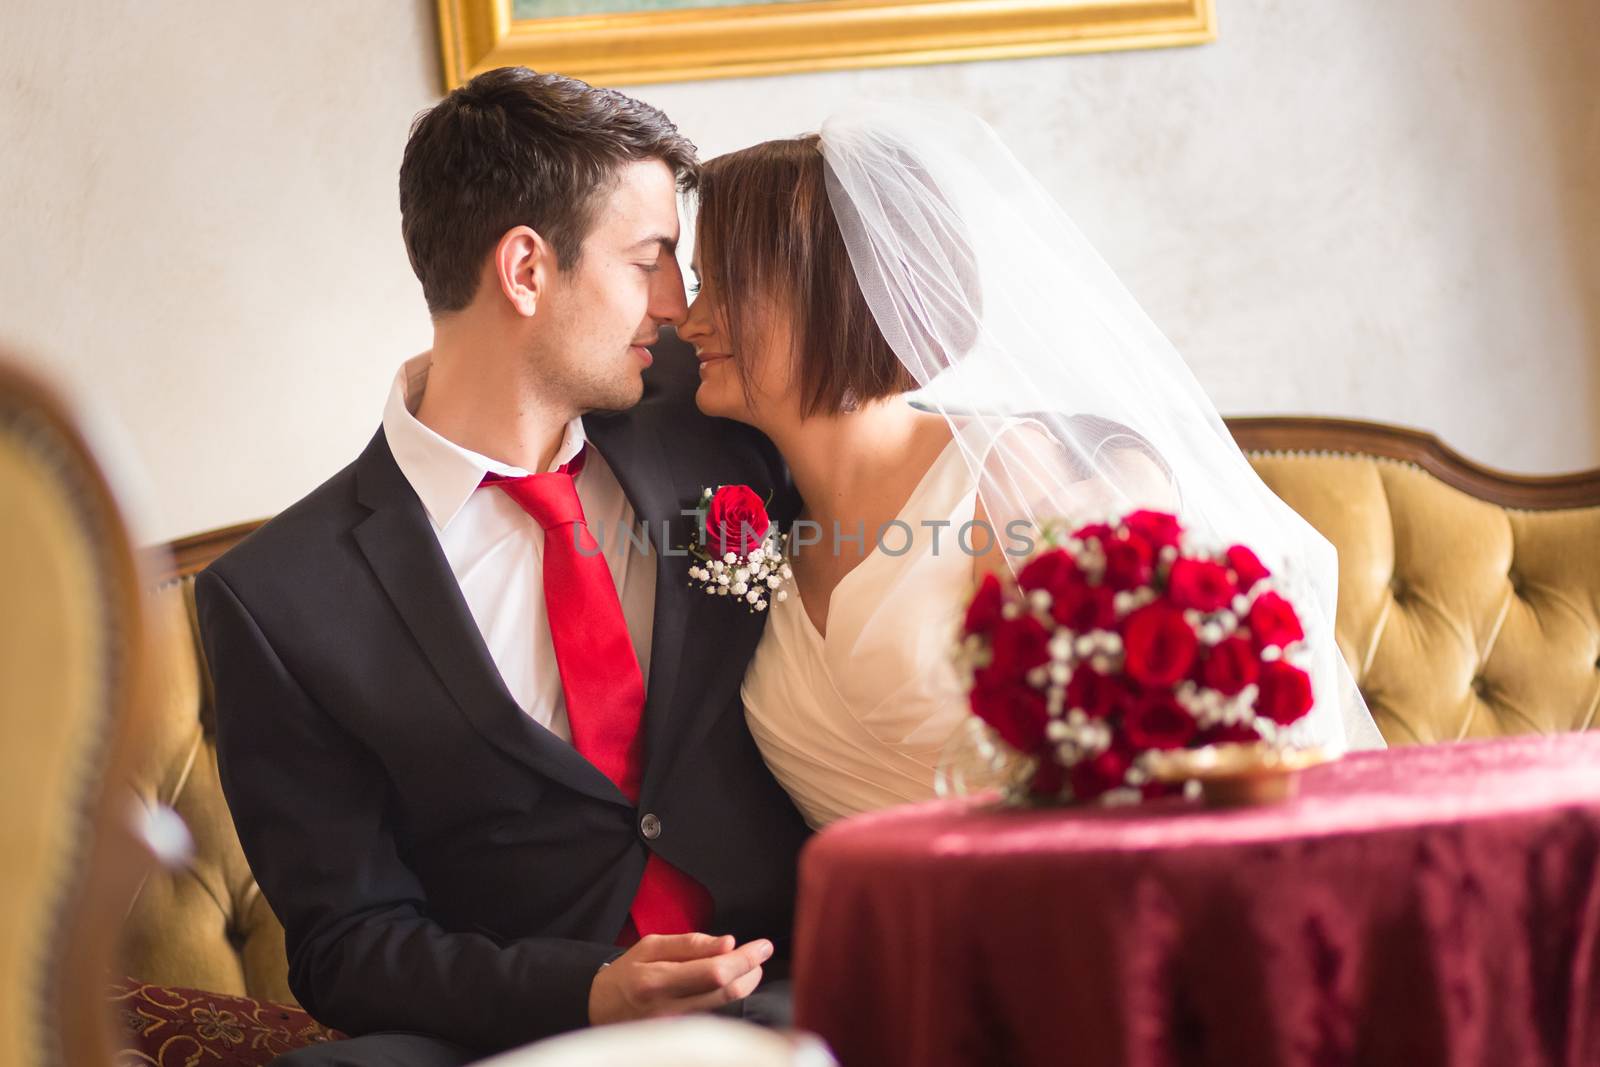 Bride and groom. Portrait of a loving wedding couple kissing.